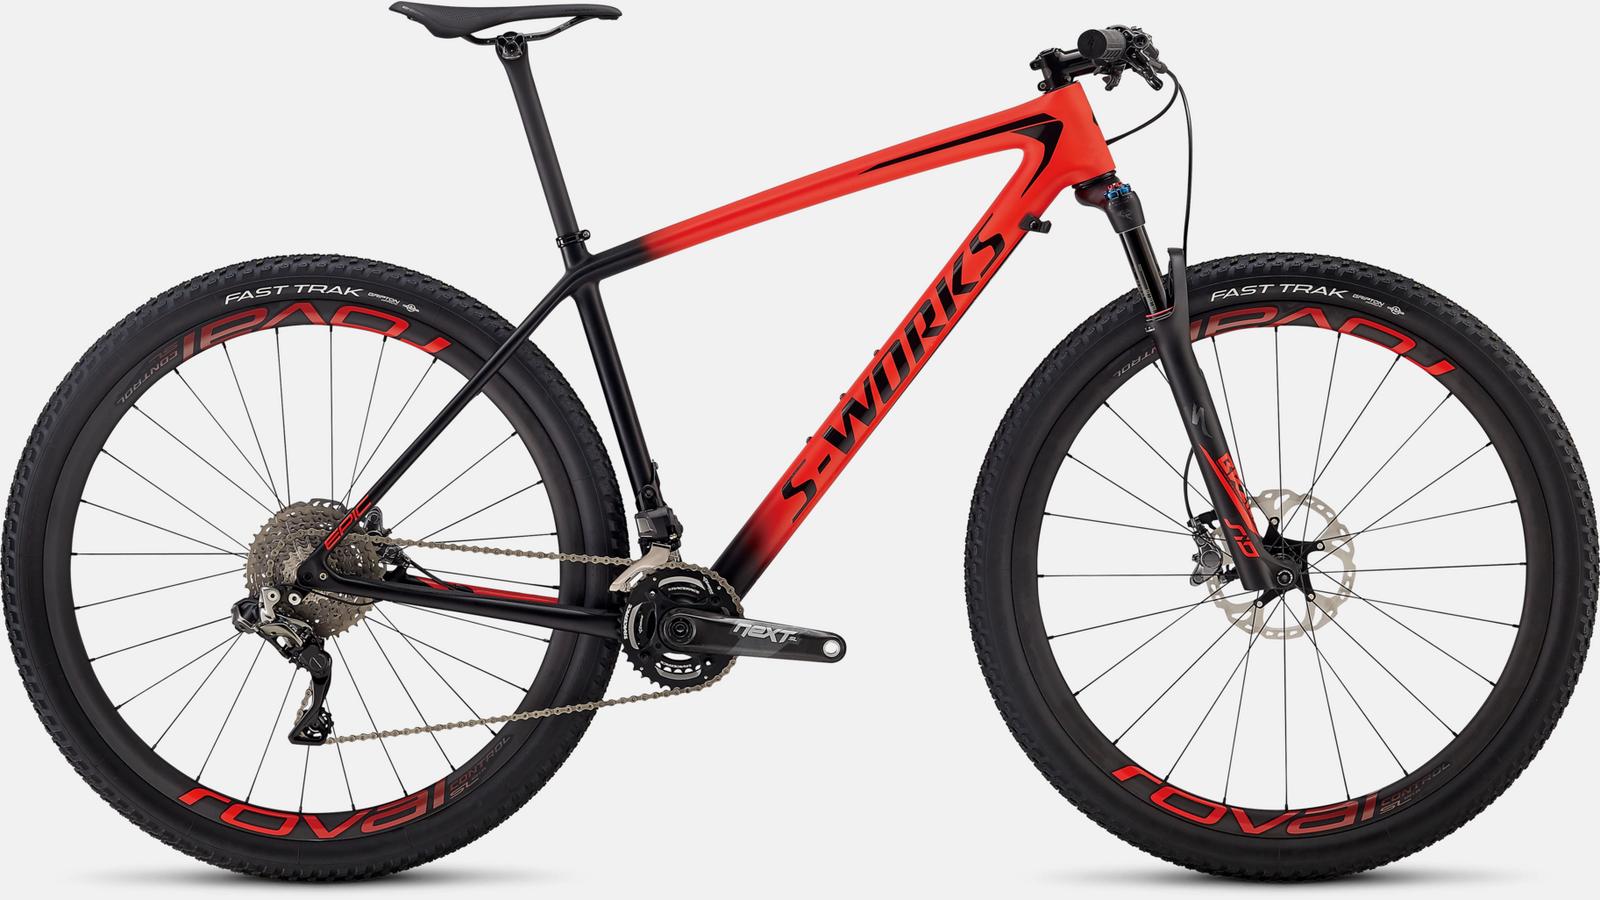 Touch-up paint for 2018 Specialized Men's S-Works Epic Hardtail XTR Di2 - Satin Rocket Red